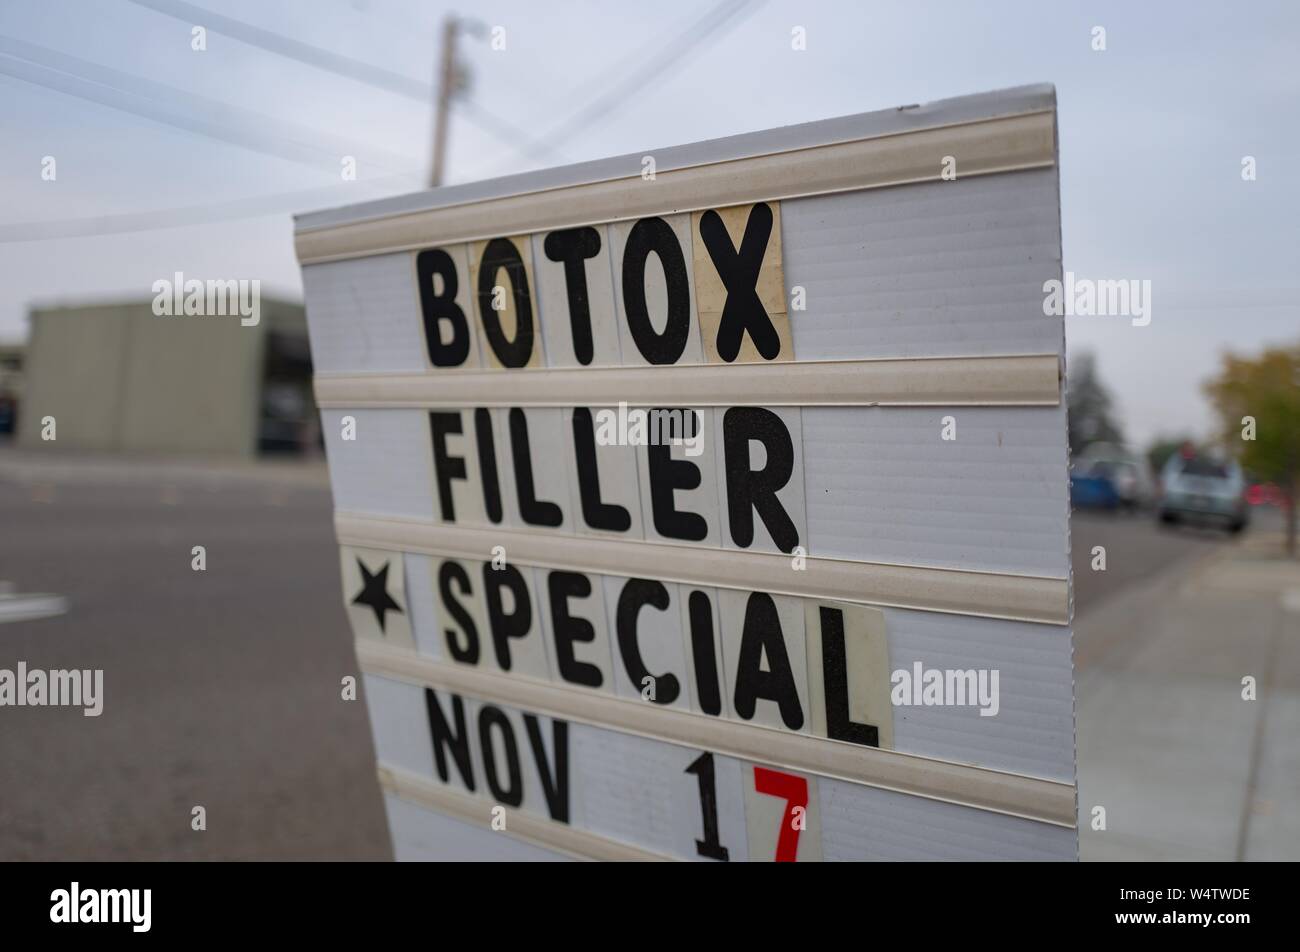 Sign advertising Botox filler injections on sale as part of a holiday promotion at a medical spa in Livermore, California, November 19, 2018. () Stock Photo